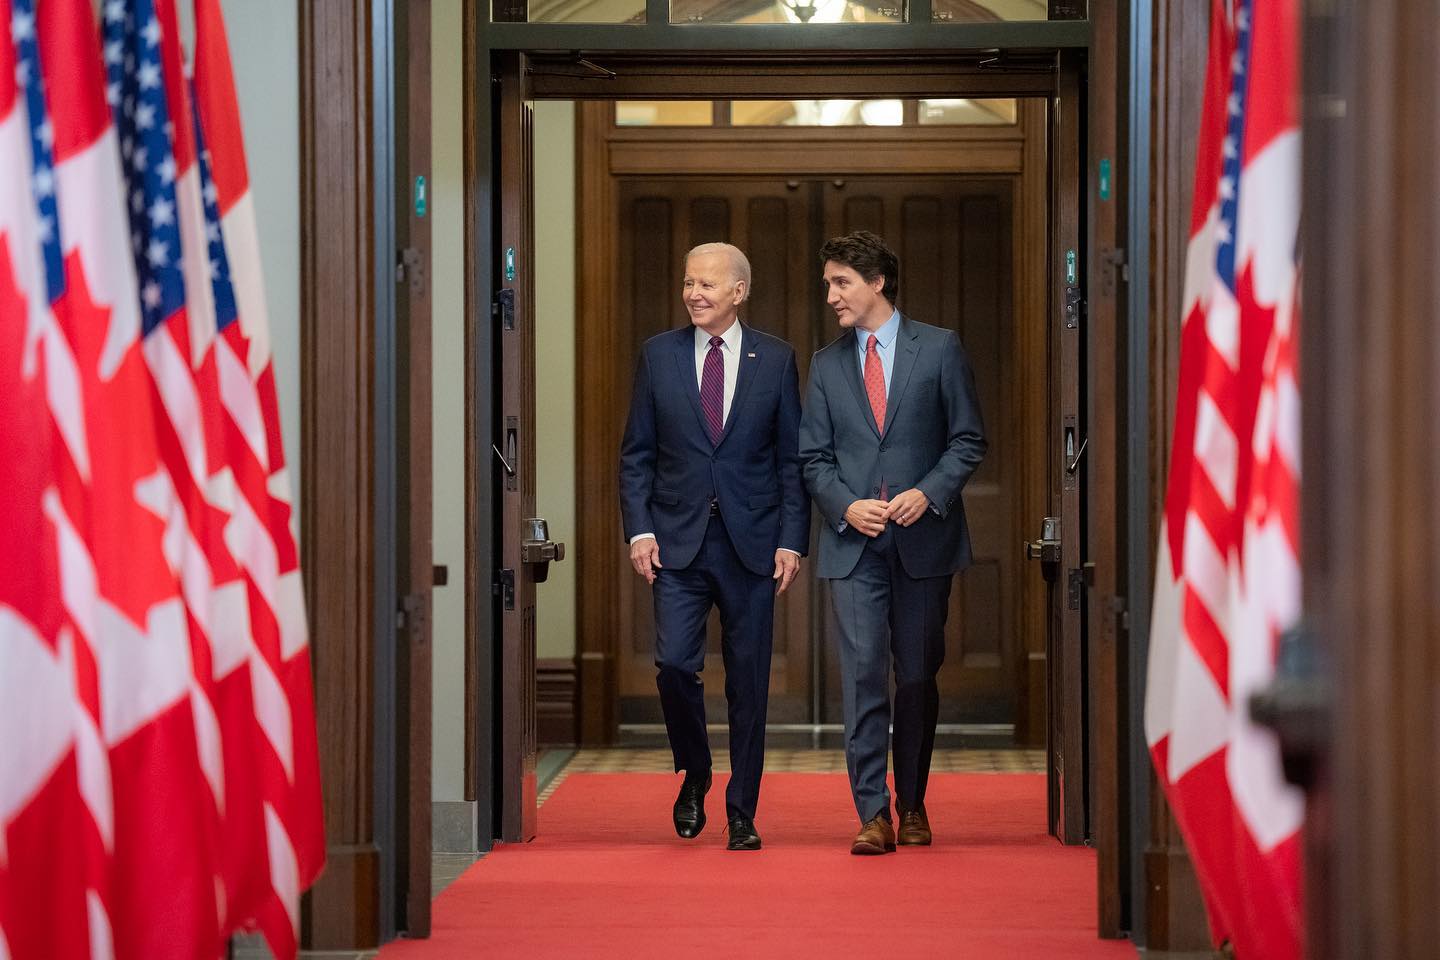 US President Joe Biden (L) and Canadian Prime Minister Justin Trudeau (R), signed agreements between Canada and US.